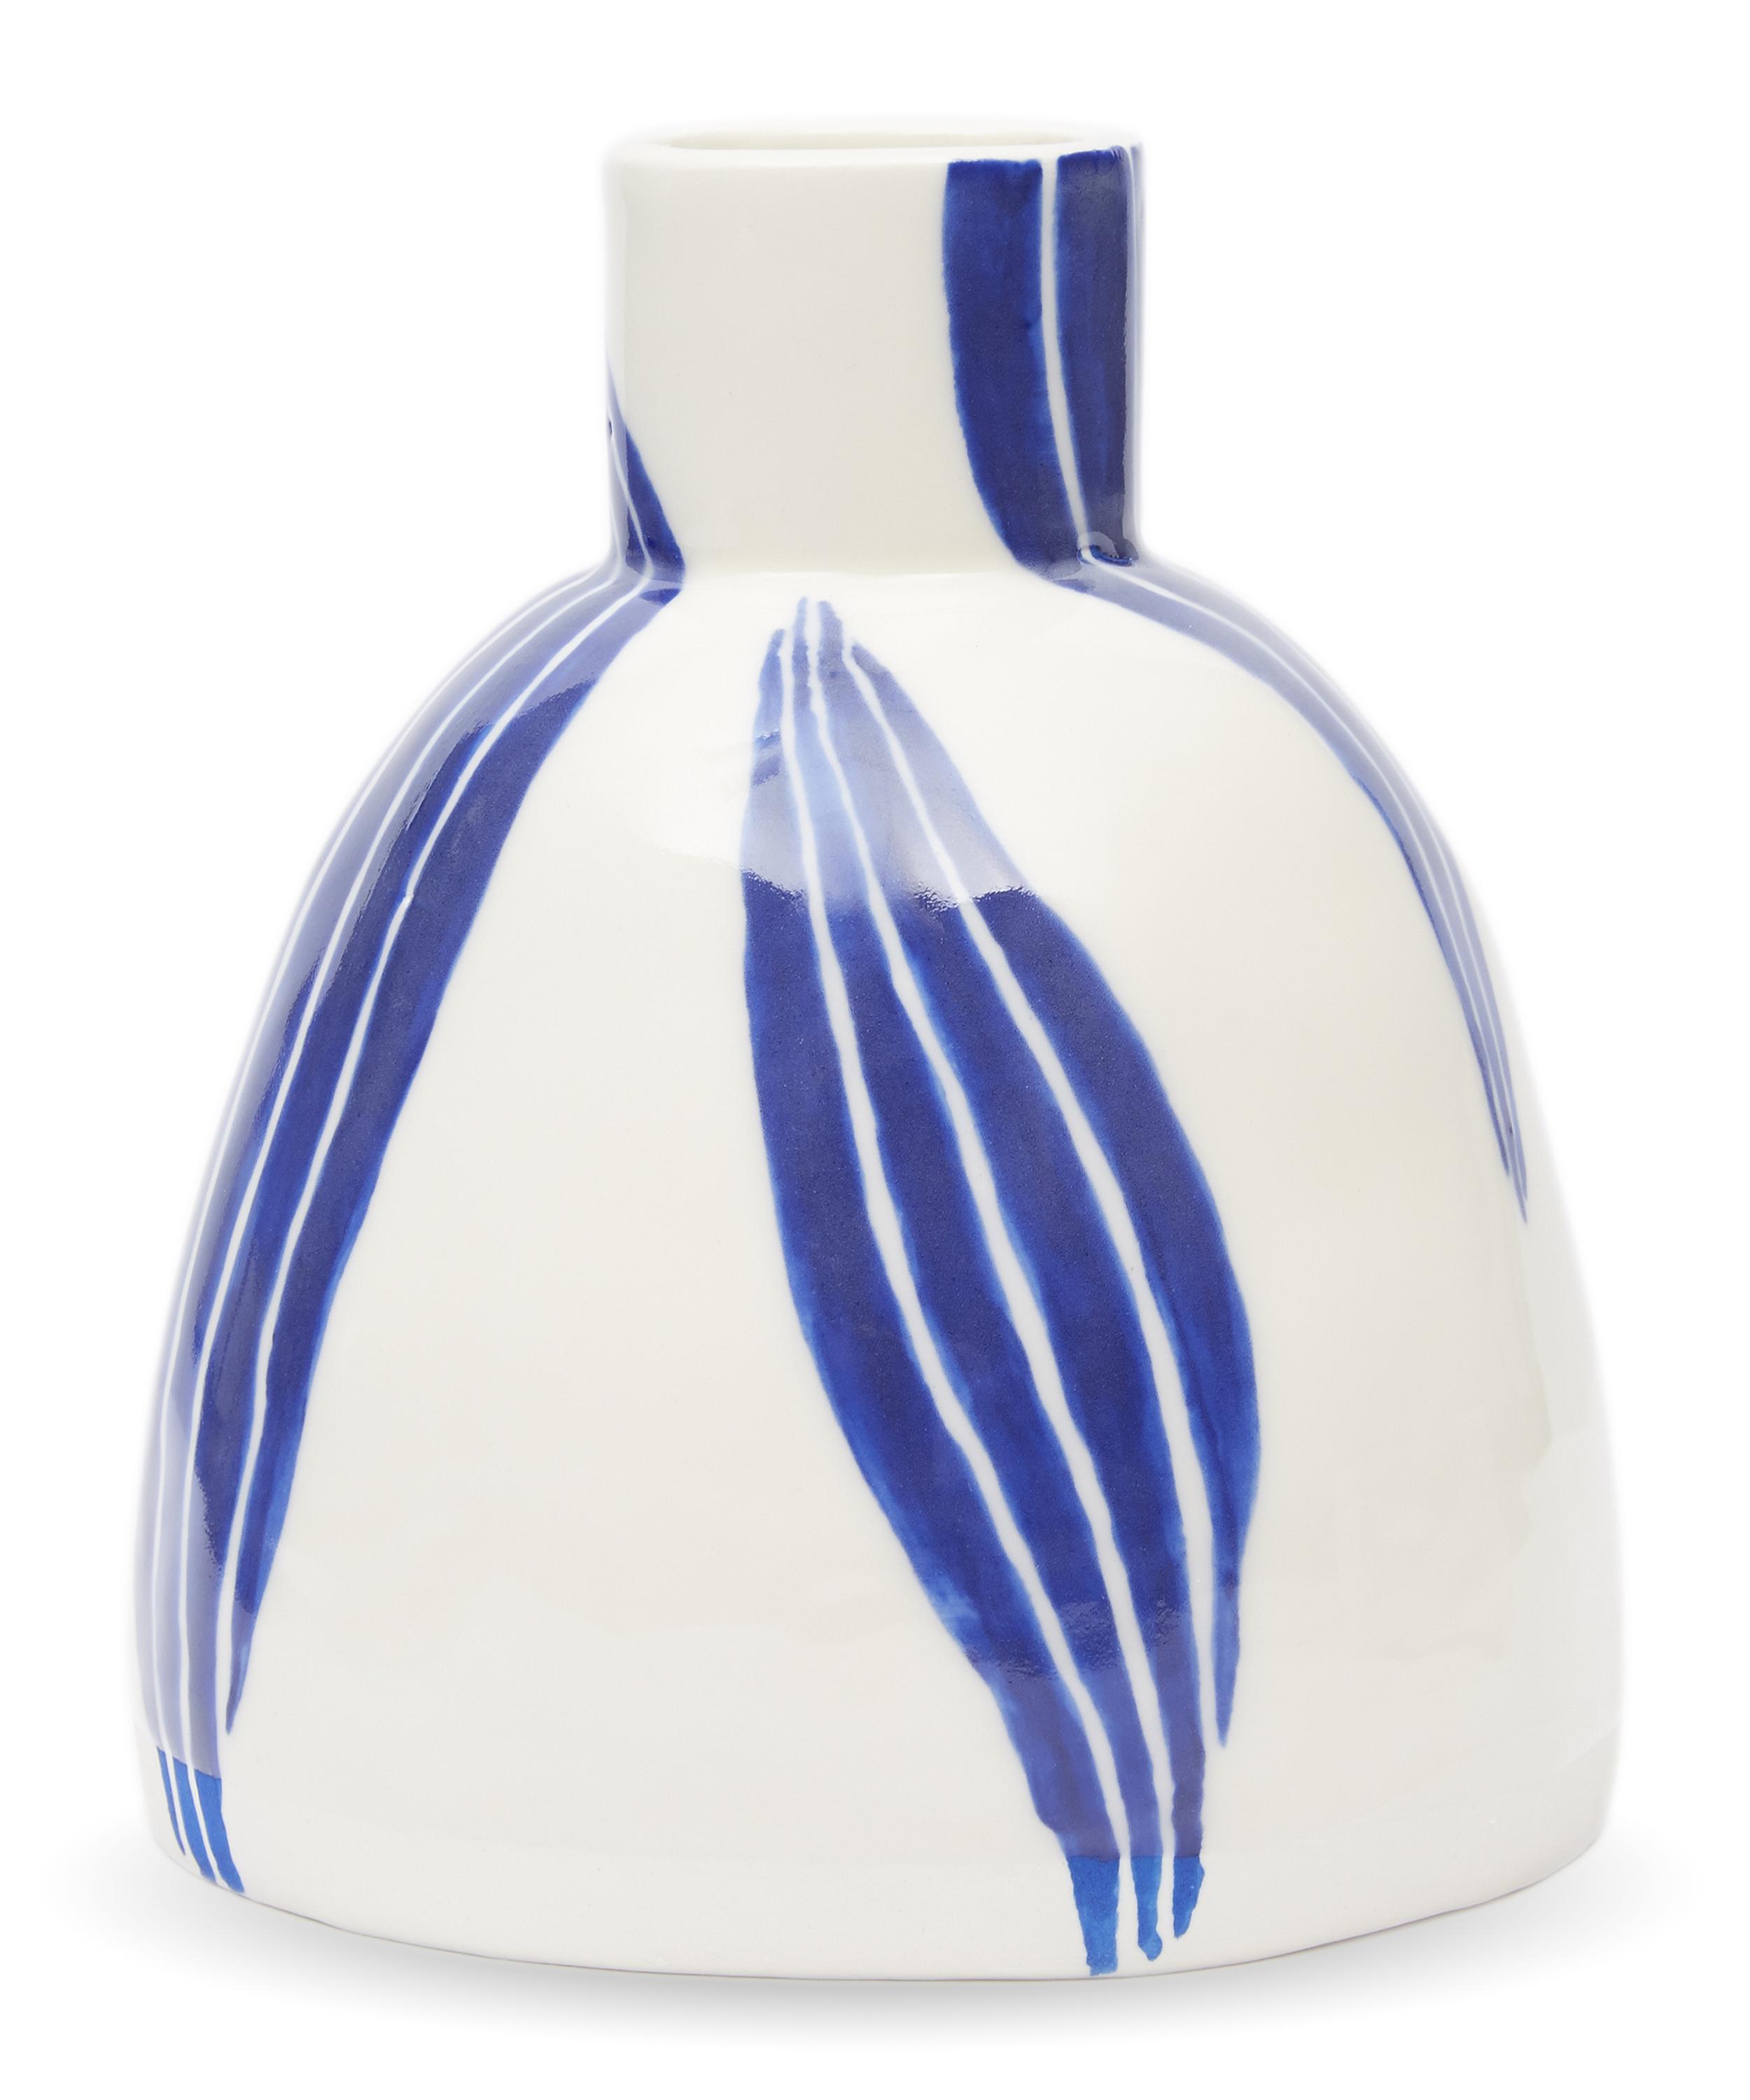 Small Bottle Vase With Leaf Motif | Liberty London